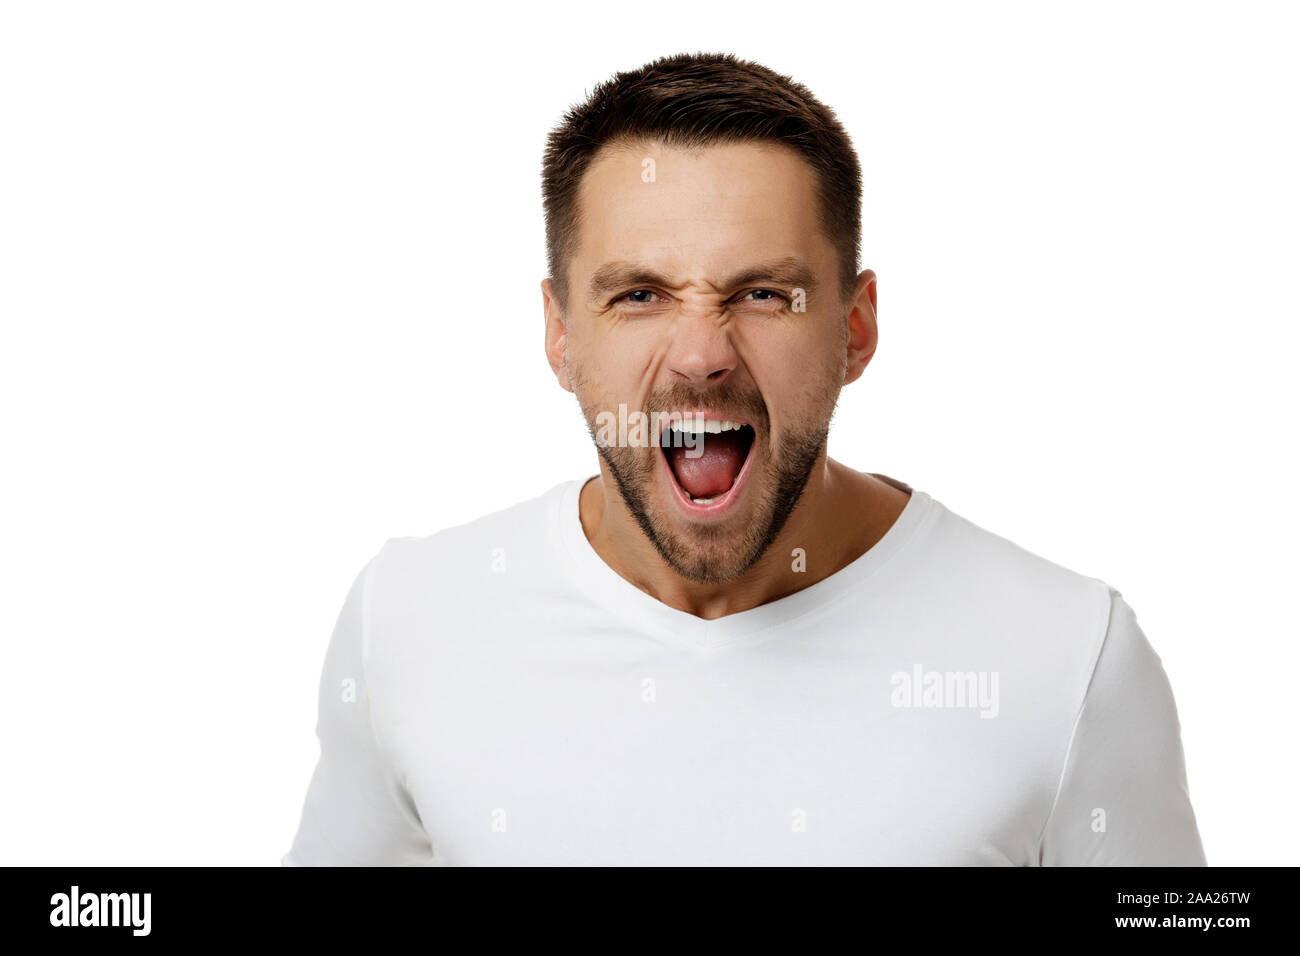 portrait of furious enraged bearded man in casual white shirt shouting and screaming isolated on white background Stock Photo